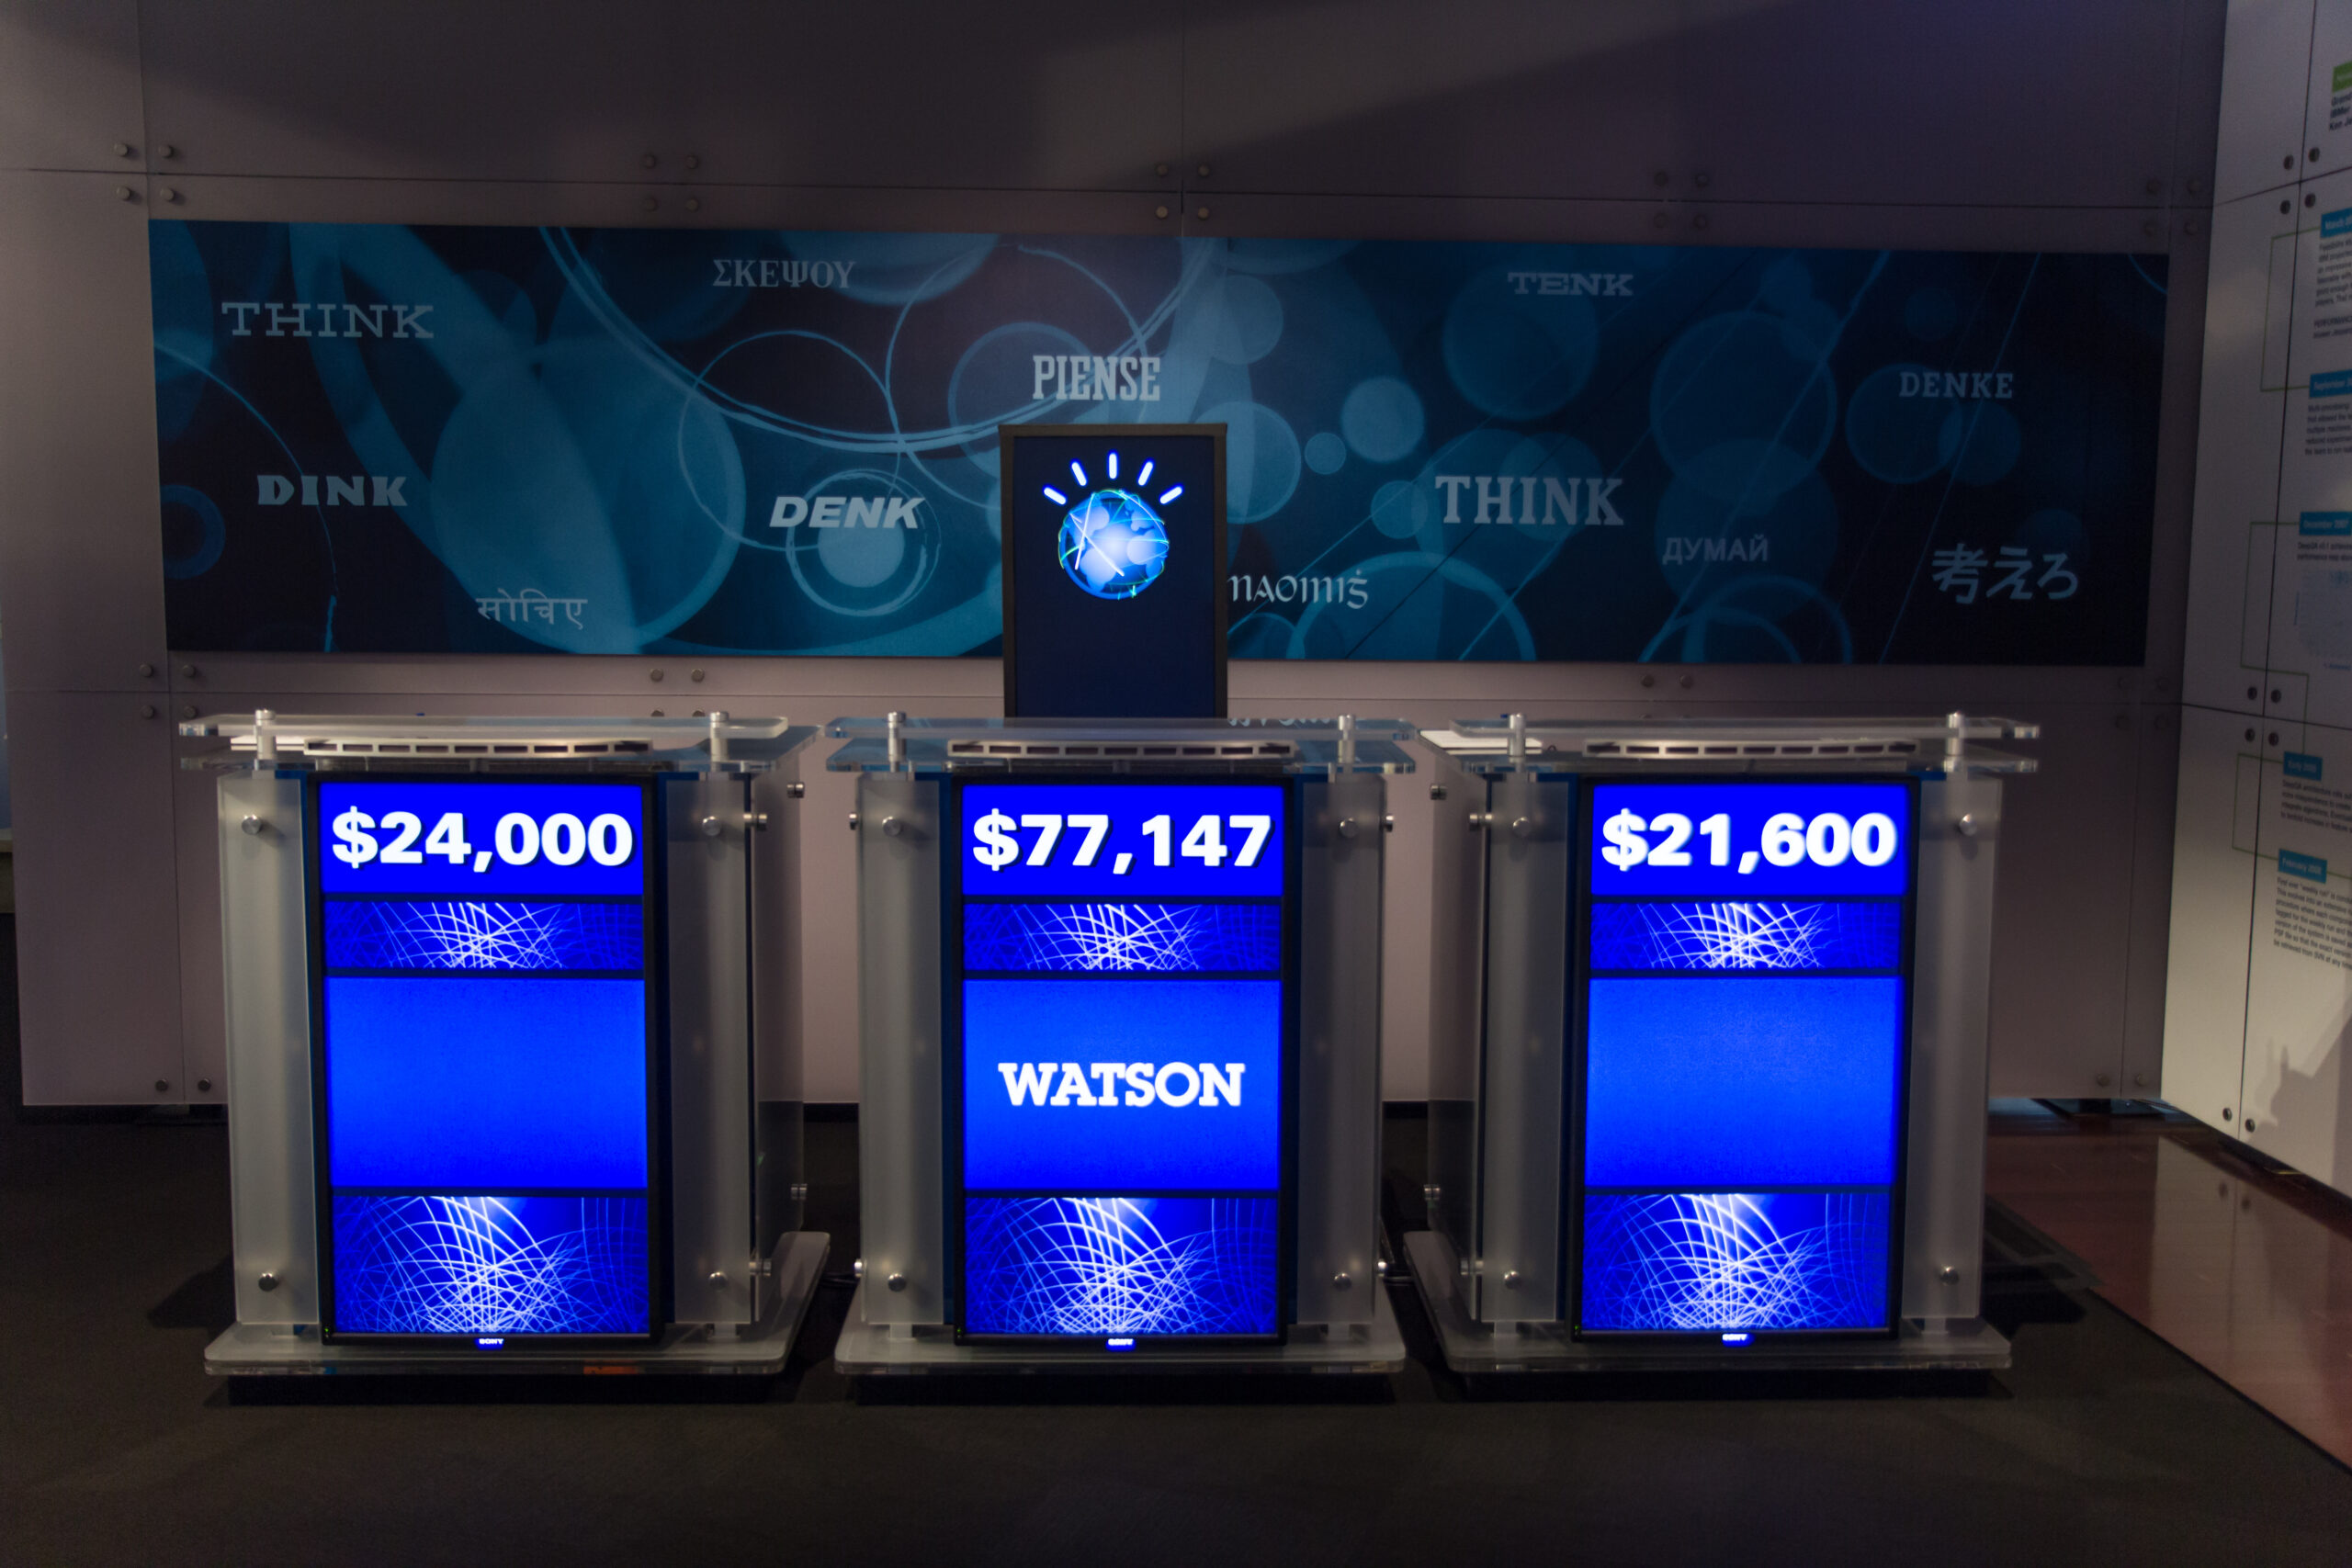 An exhibit shows three Jeopardy lecterns with prize winnings displayed. The largest amount belongs to the IBM computer named Watson.